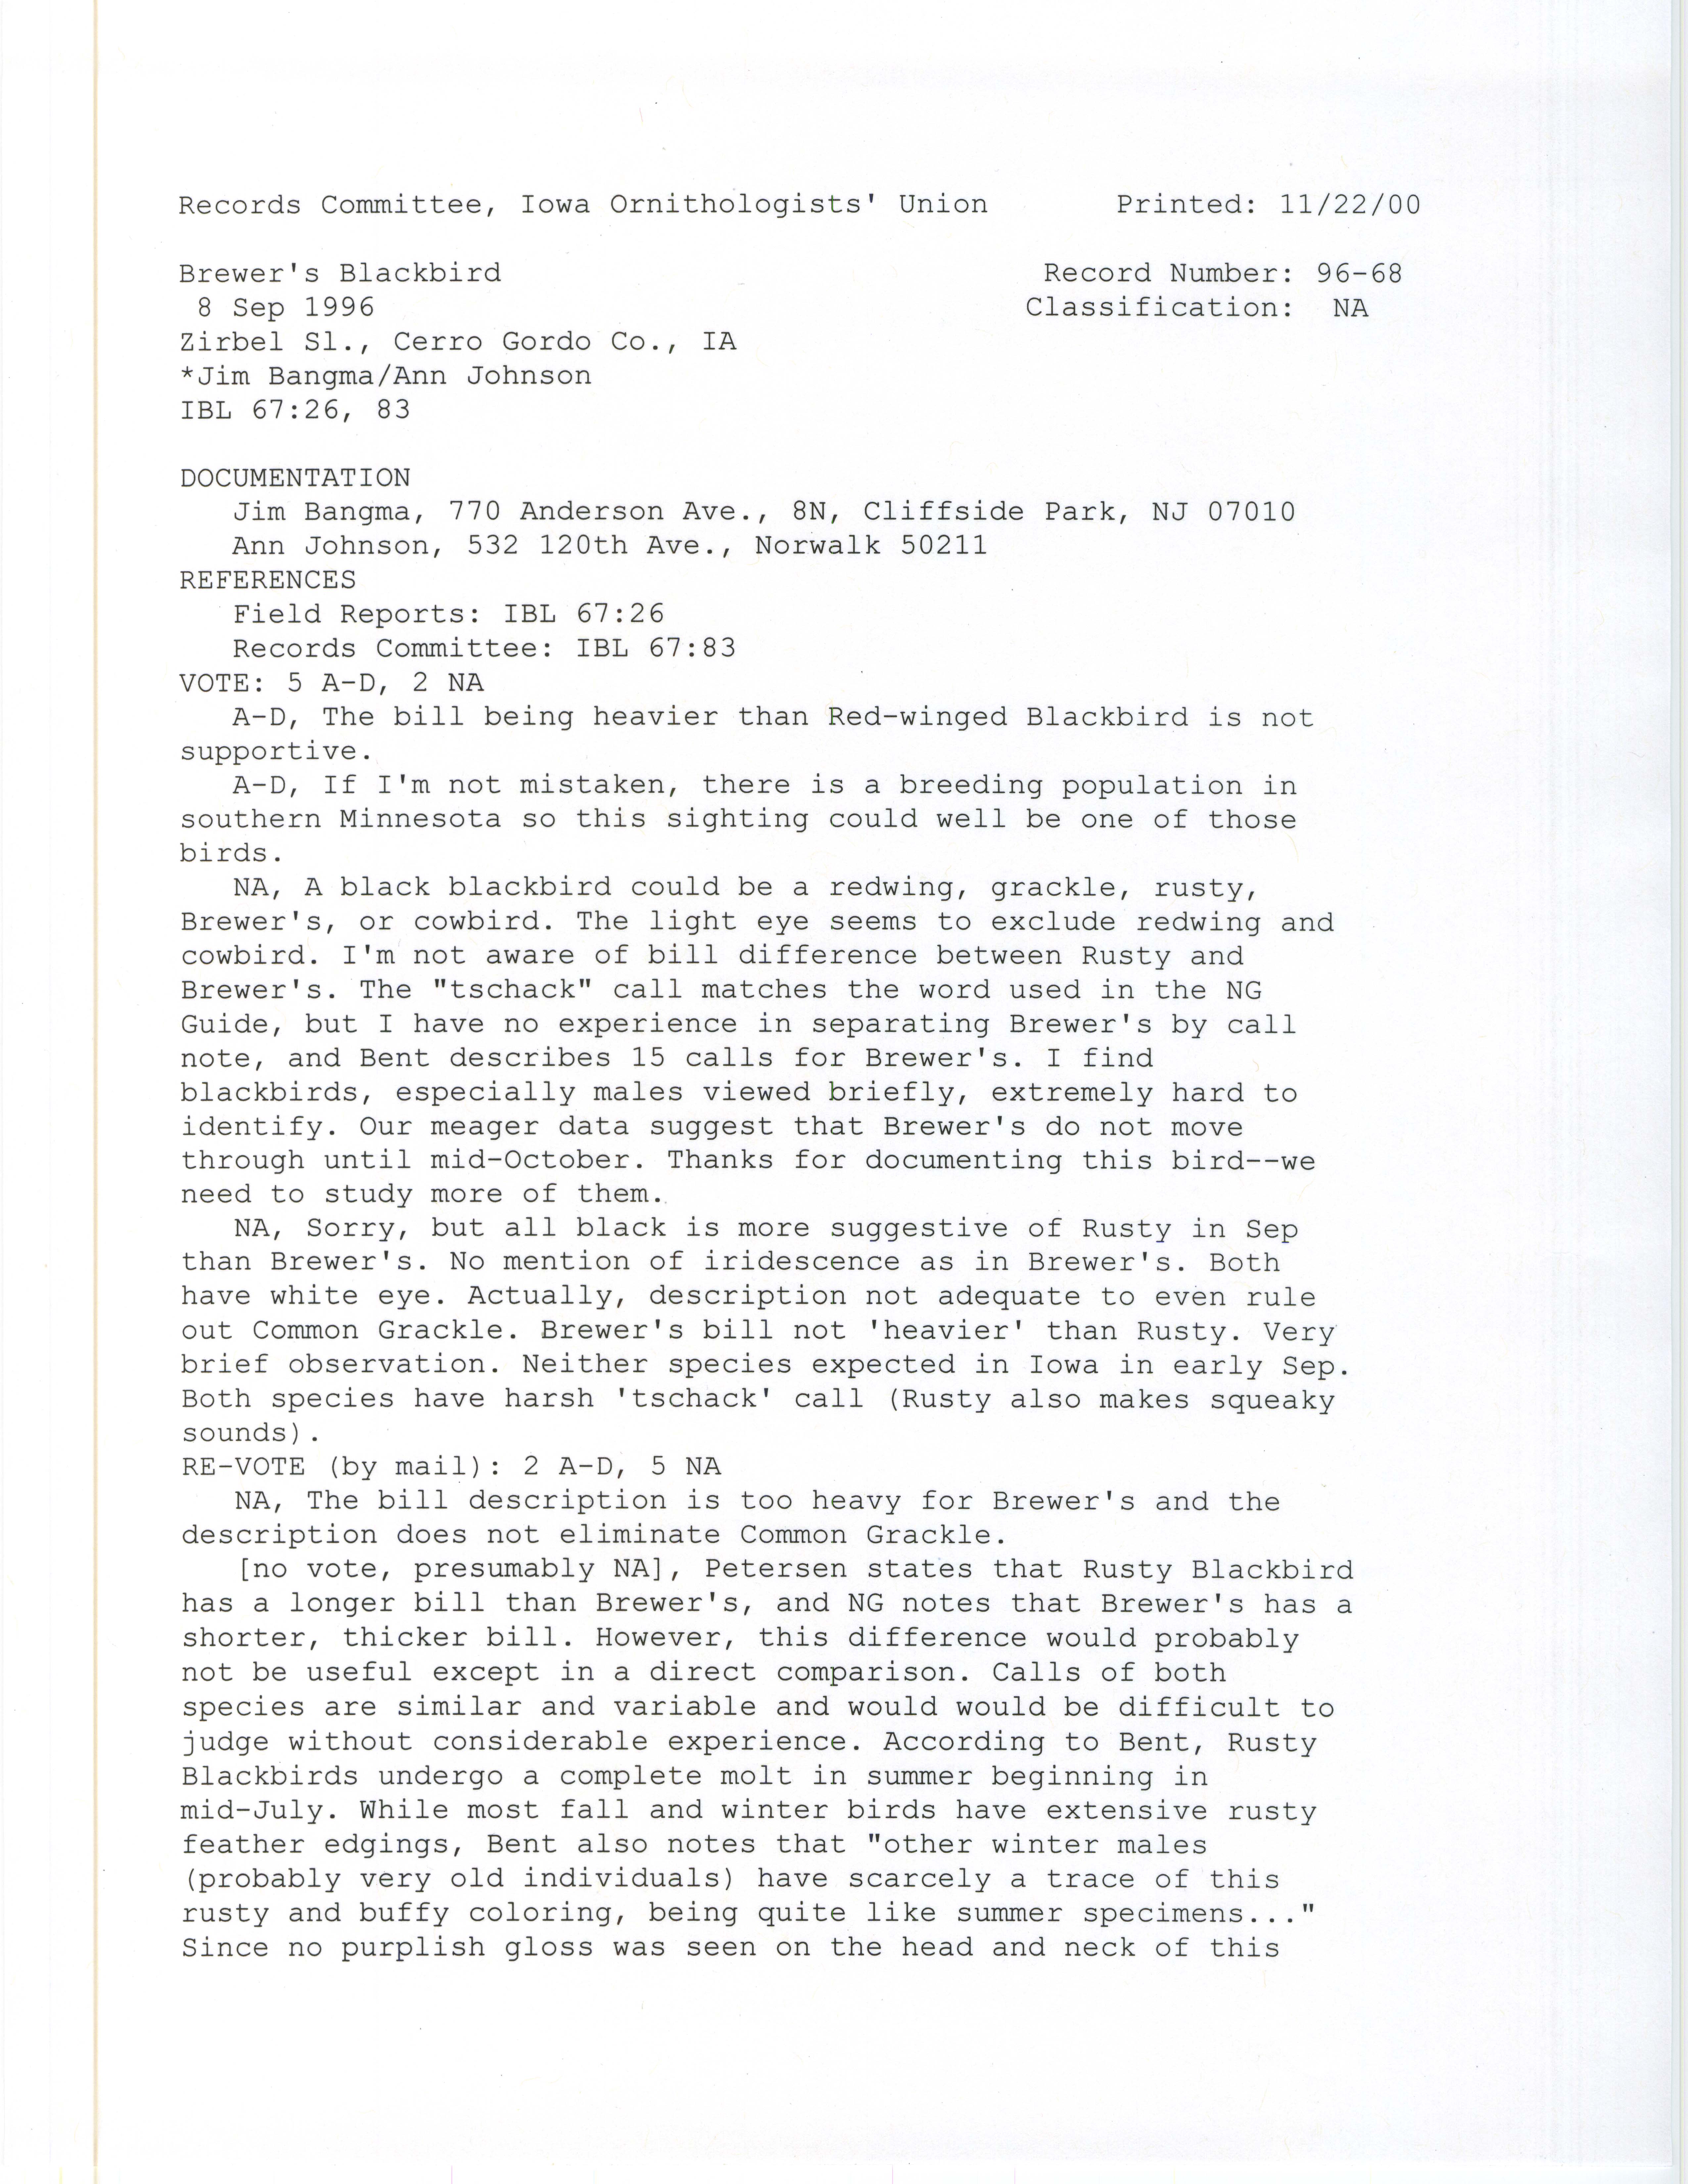 Records Committee review for rare bird sighting for Brewer's Blackbird at Zirbel Slough, 1996